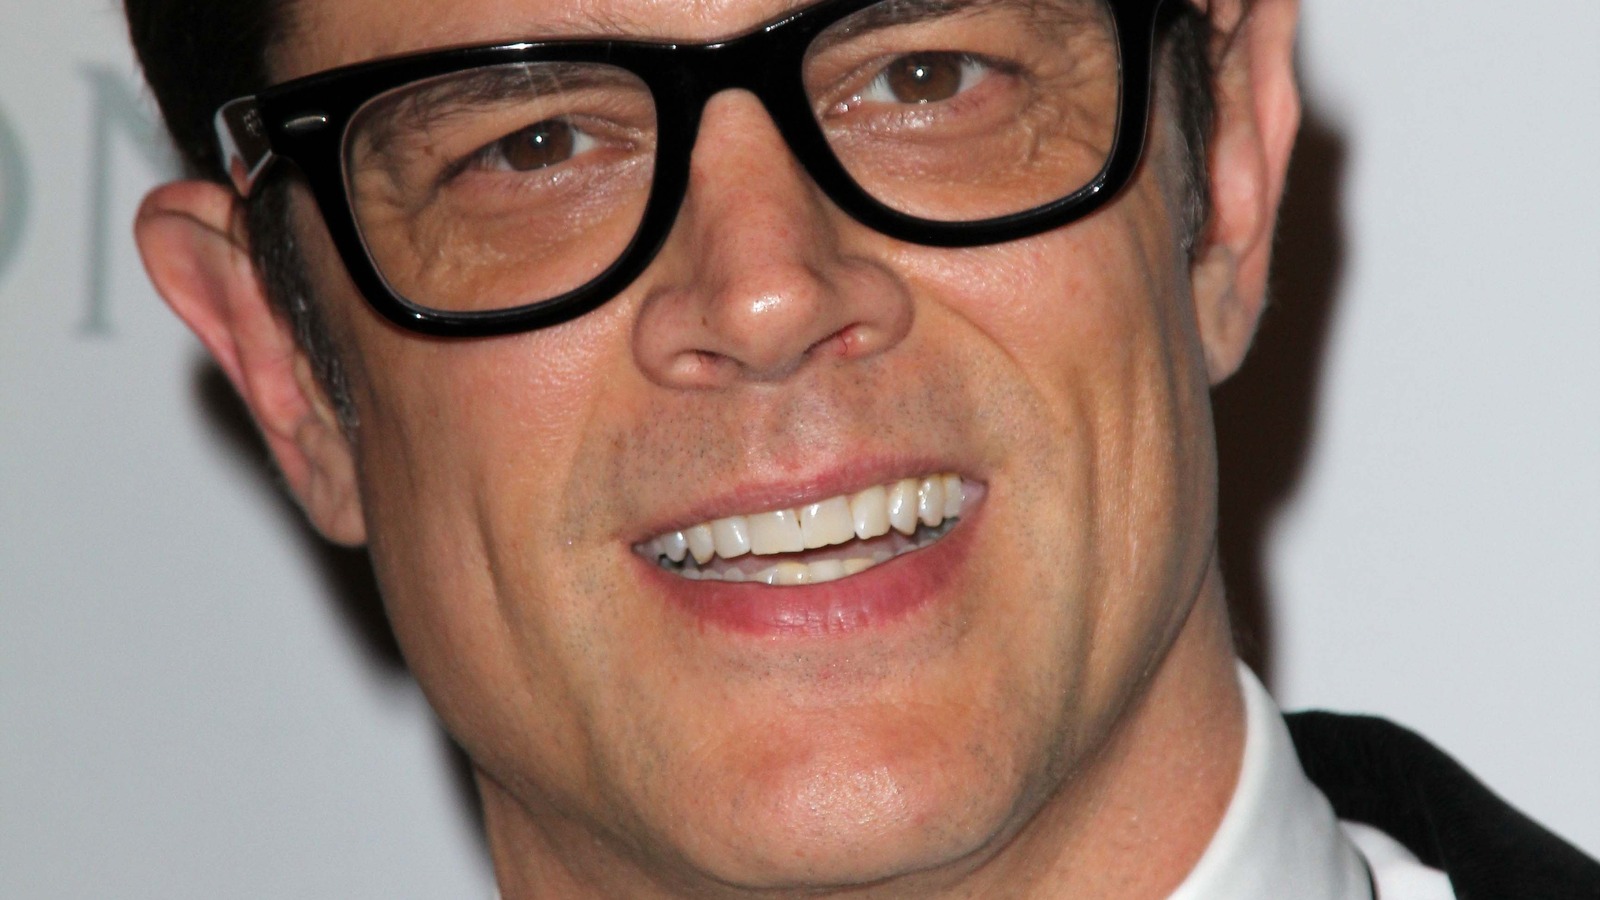 Johnny Knoxville was forced to give up extreme stunts after suffering a serious injury